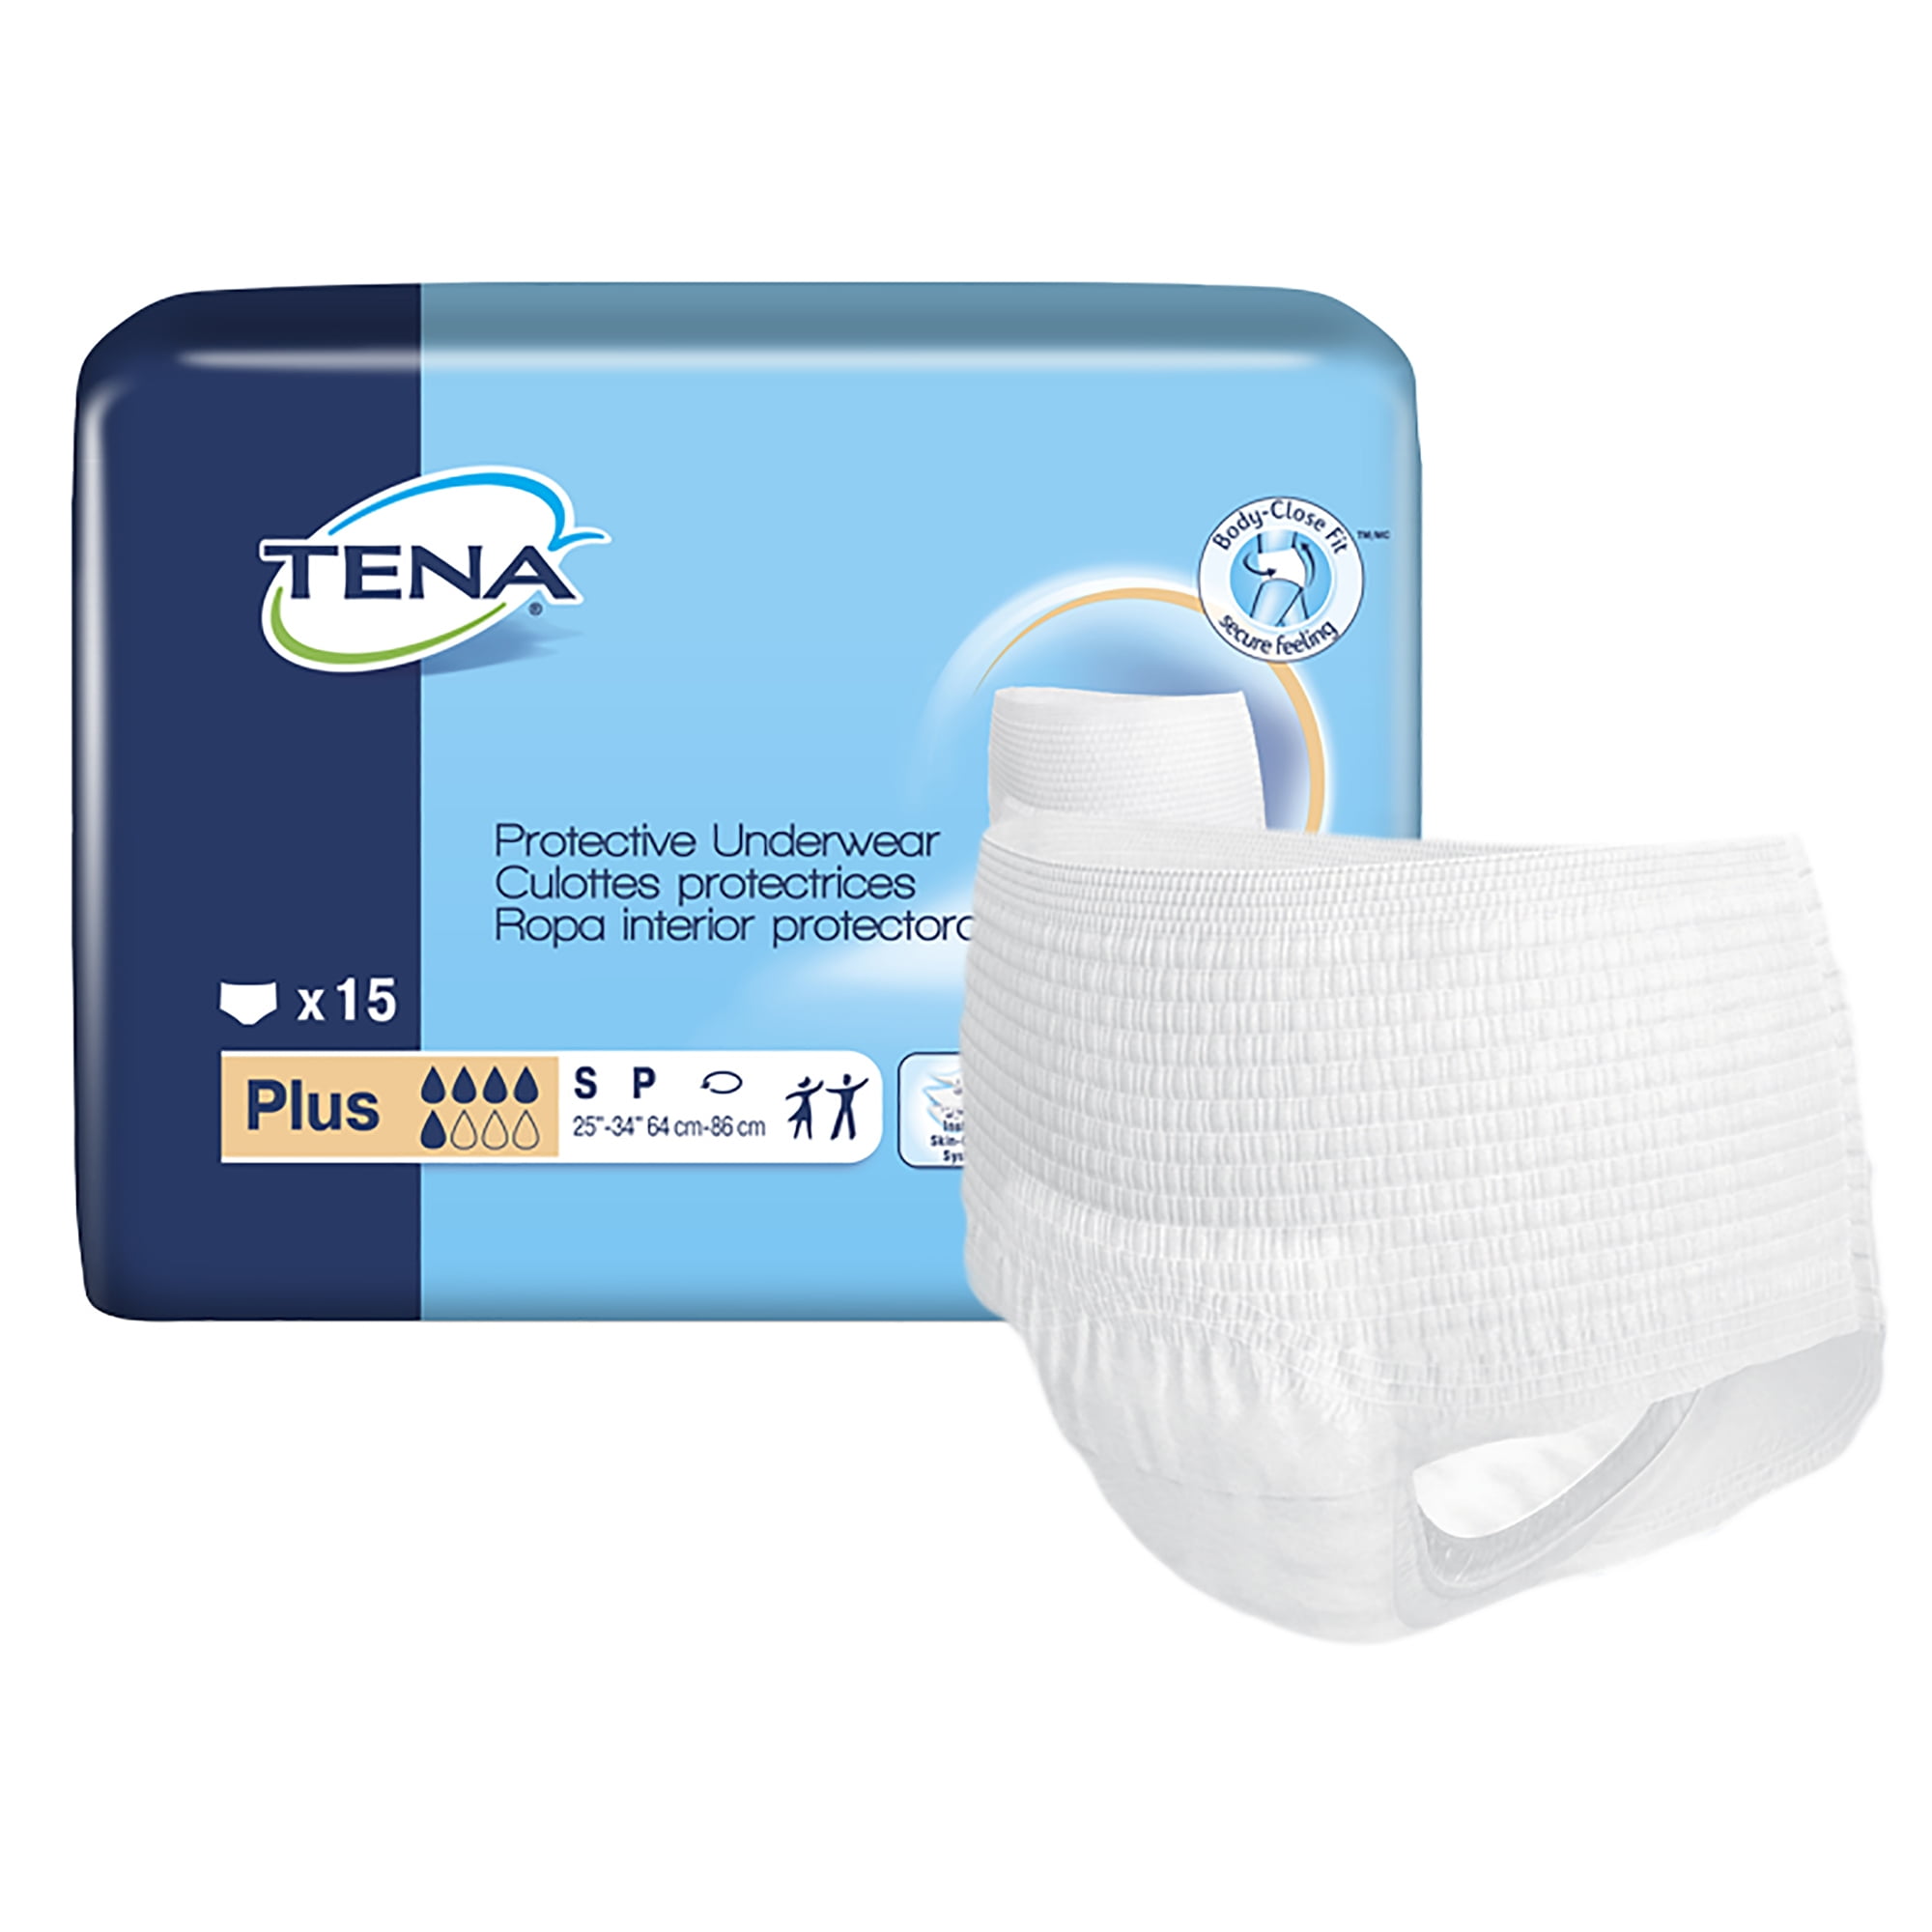 TENA ProSkin Plus, Breathable Underwear, Incontinence, Disposable, Small, 60 Ct